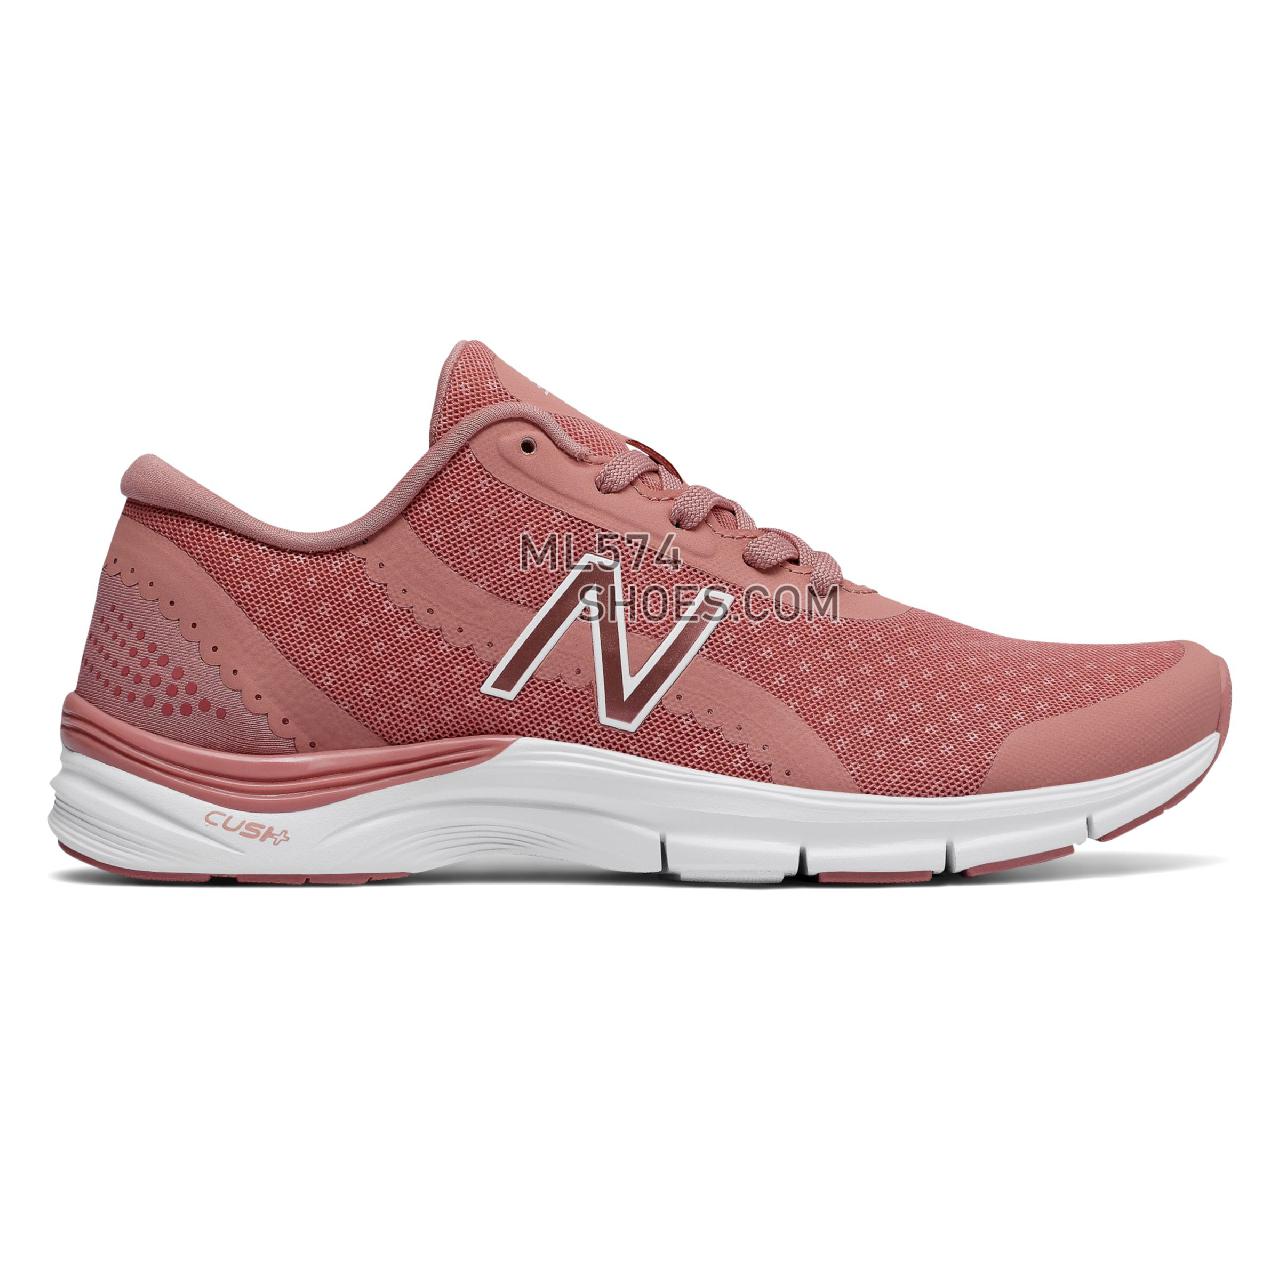 New Balance 711v3 Mesh Trainer - Women's 711v3 Mesh Trainer - Dusted Peach with White - WX711PS3